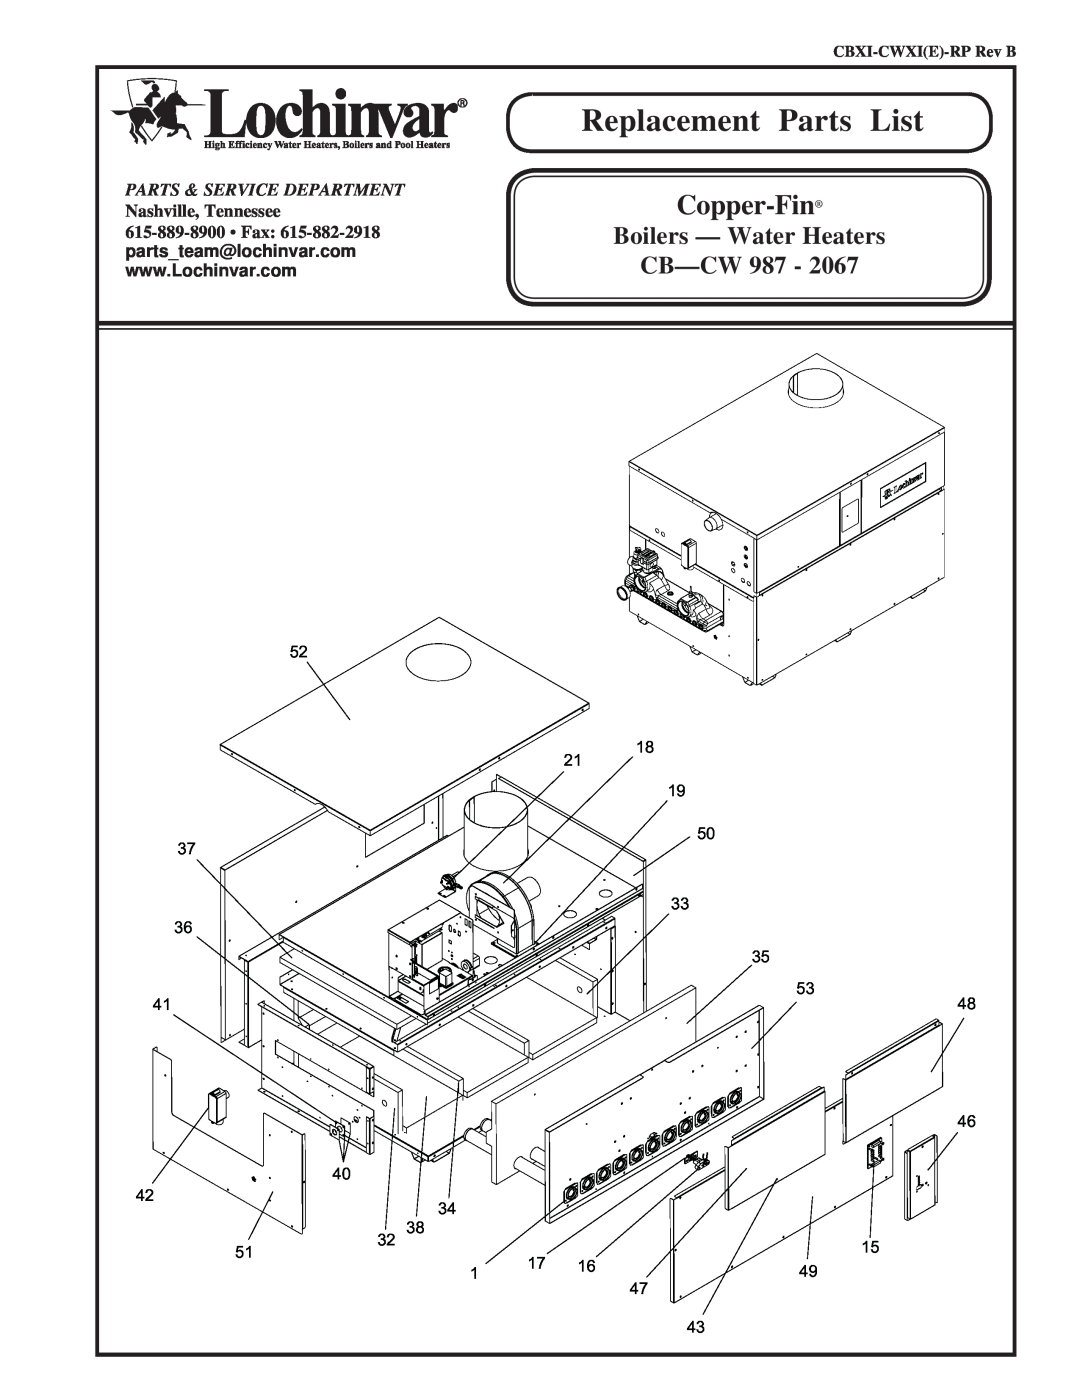 Lochinvar CB--CW 987 - 2067 manual Replacement, Parts, List, Copper-Fin, Boilers - Water Heaters, CB-CW 987 